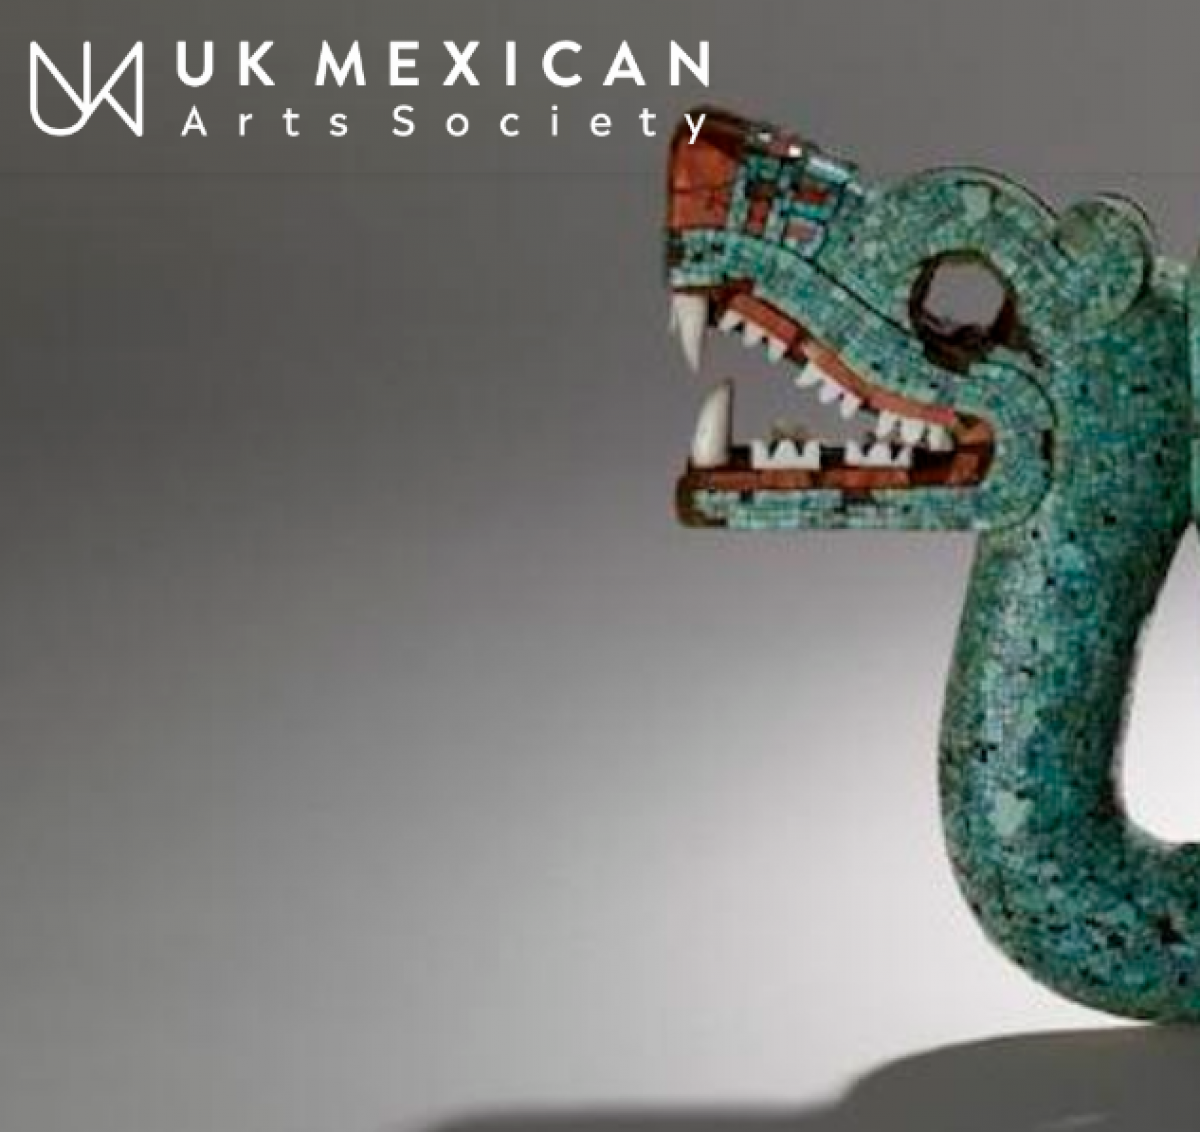 Mesoamerican Art From the past to the present uk mexican art society